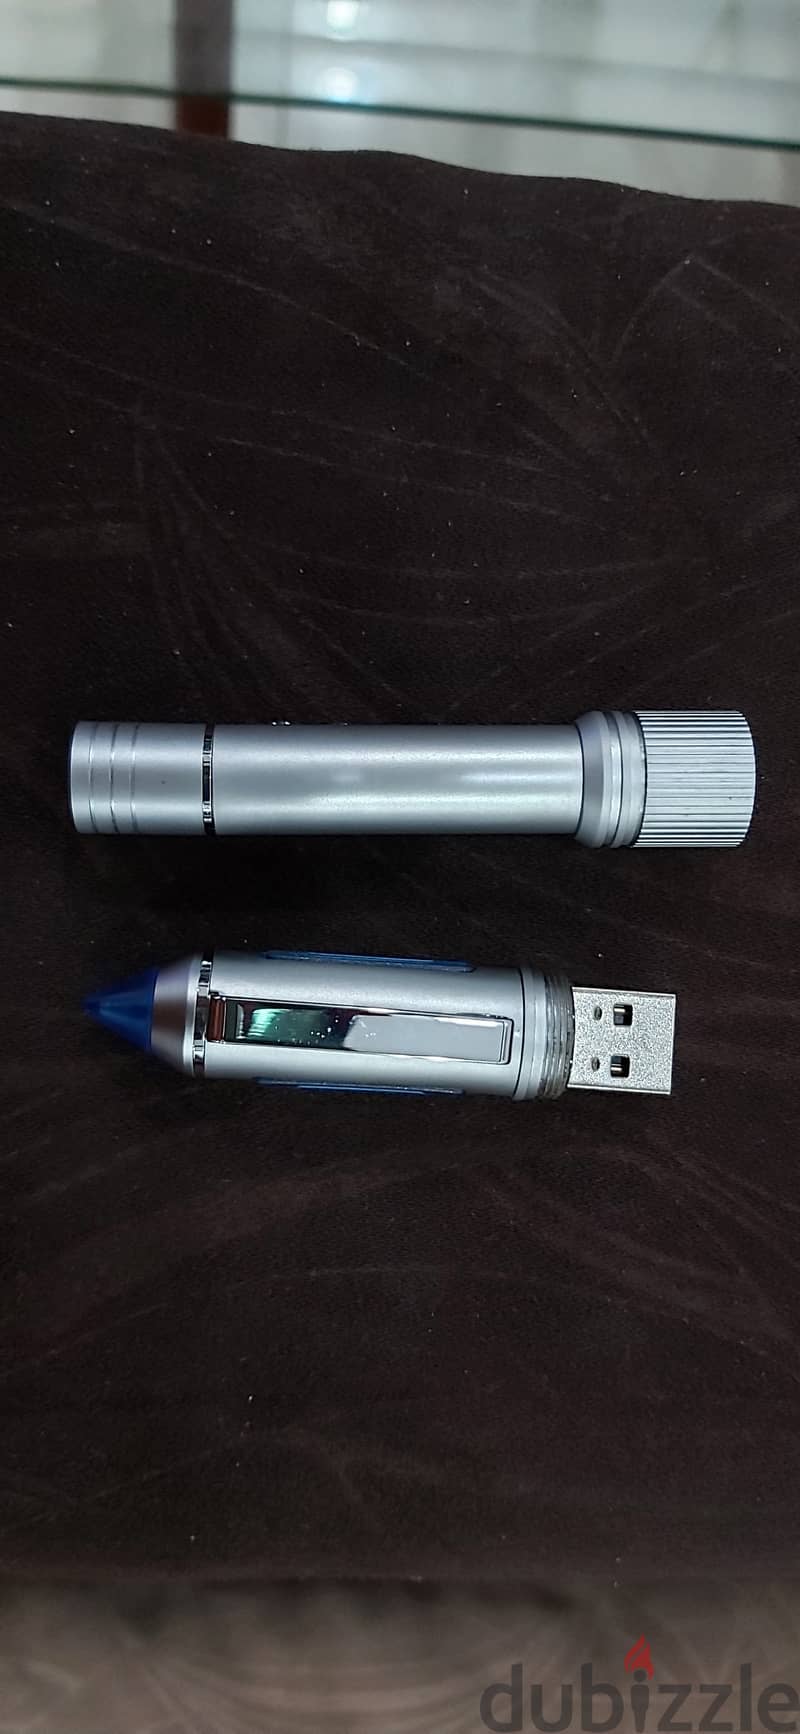 Flash drives with pen & laser light 4